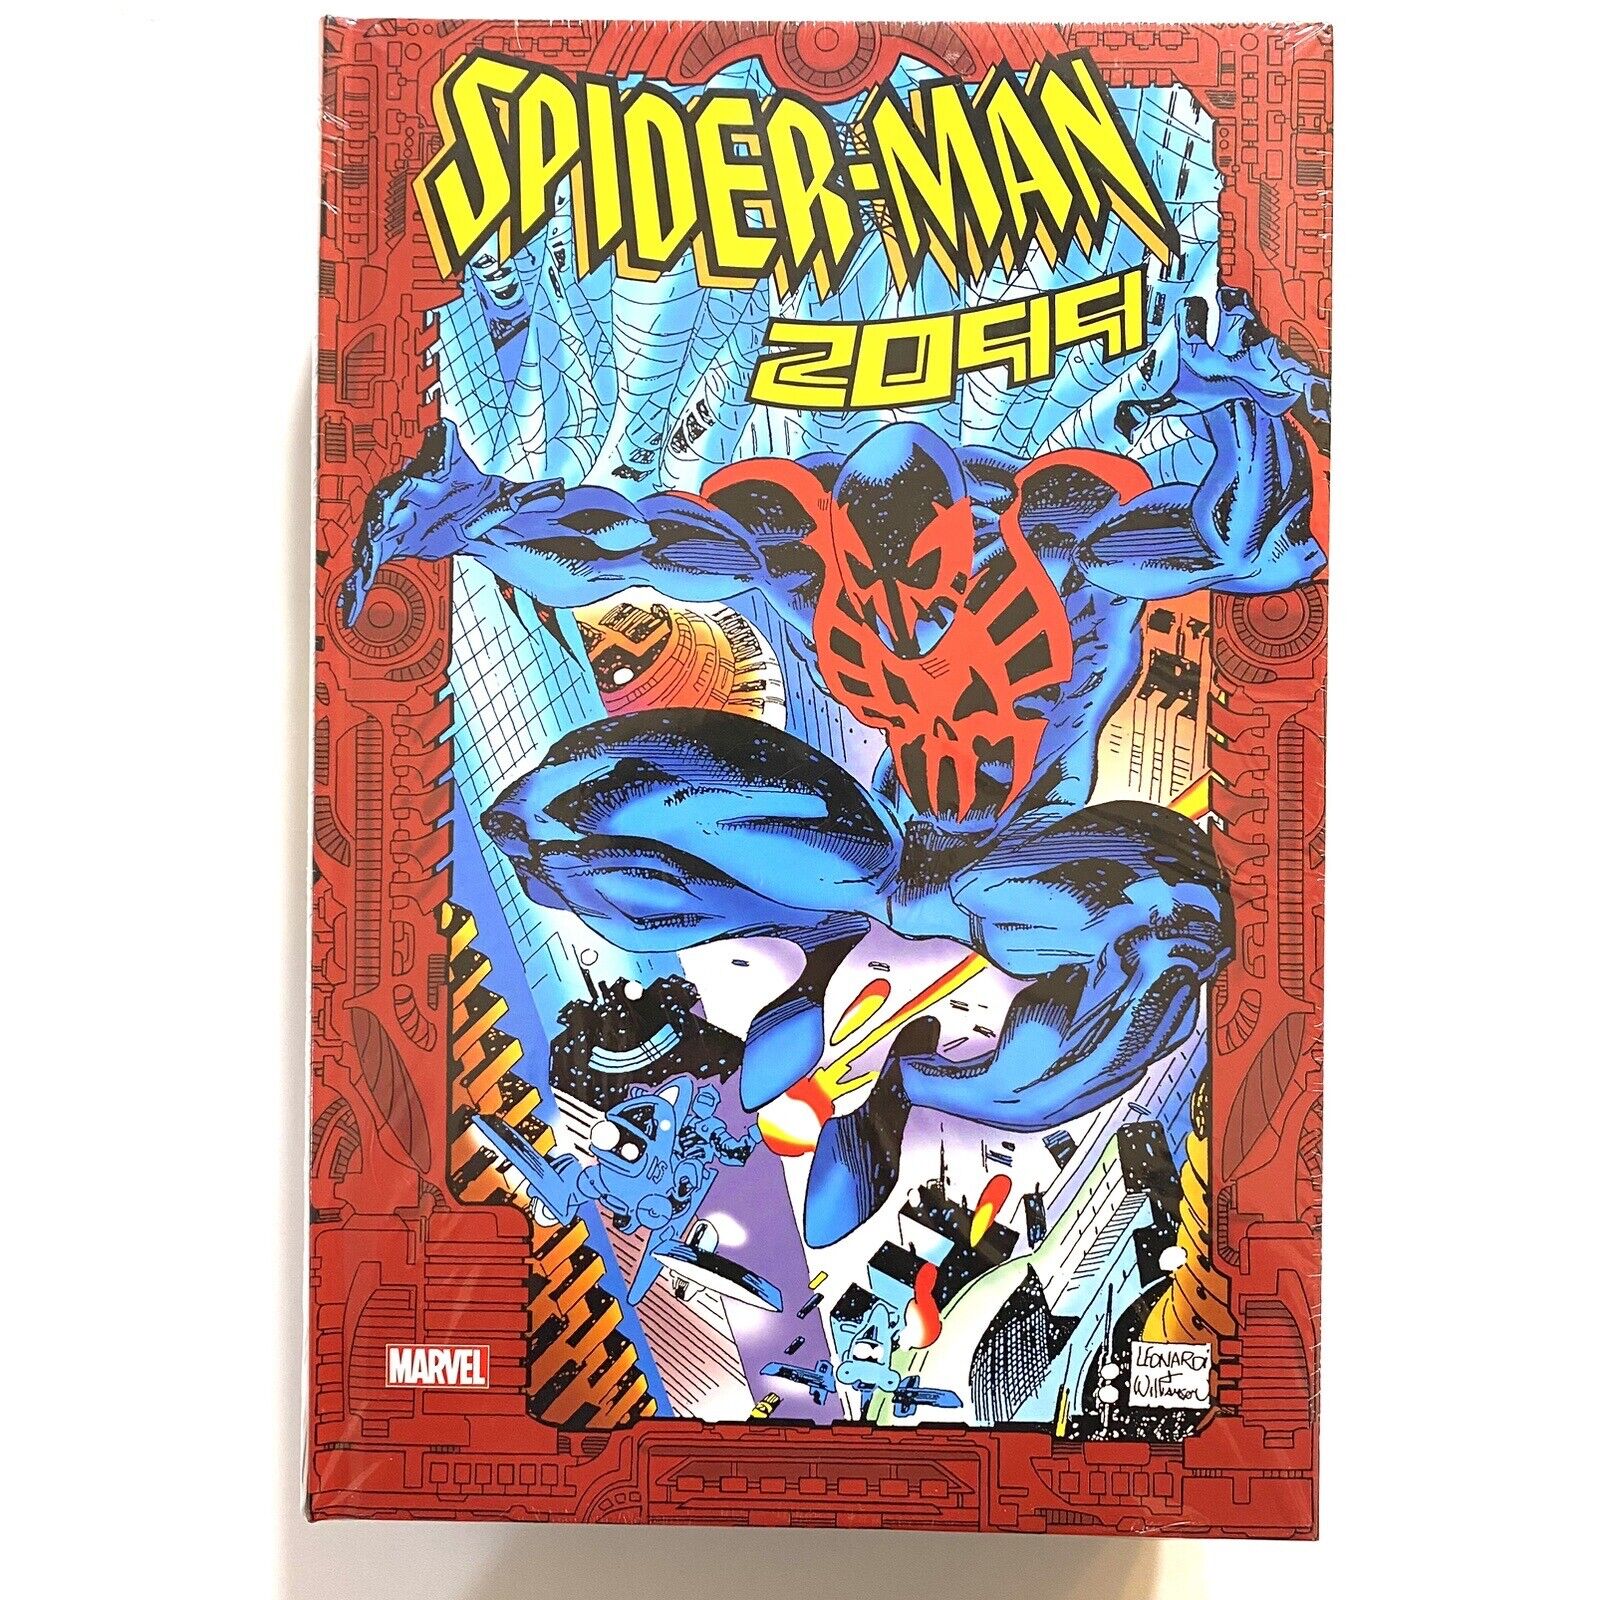 Spider-Man 2099 Omnibus Vol 1 New Sealed Rare HC $5 Flat Combined Shipping